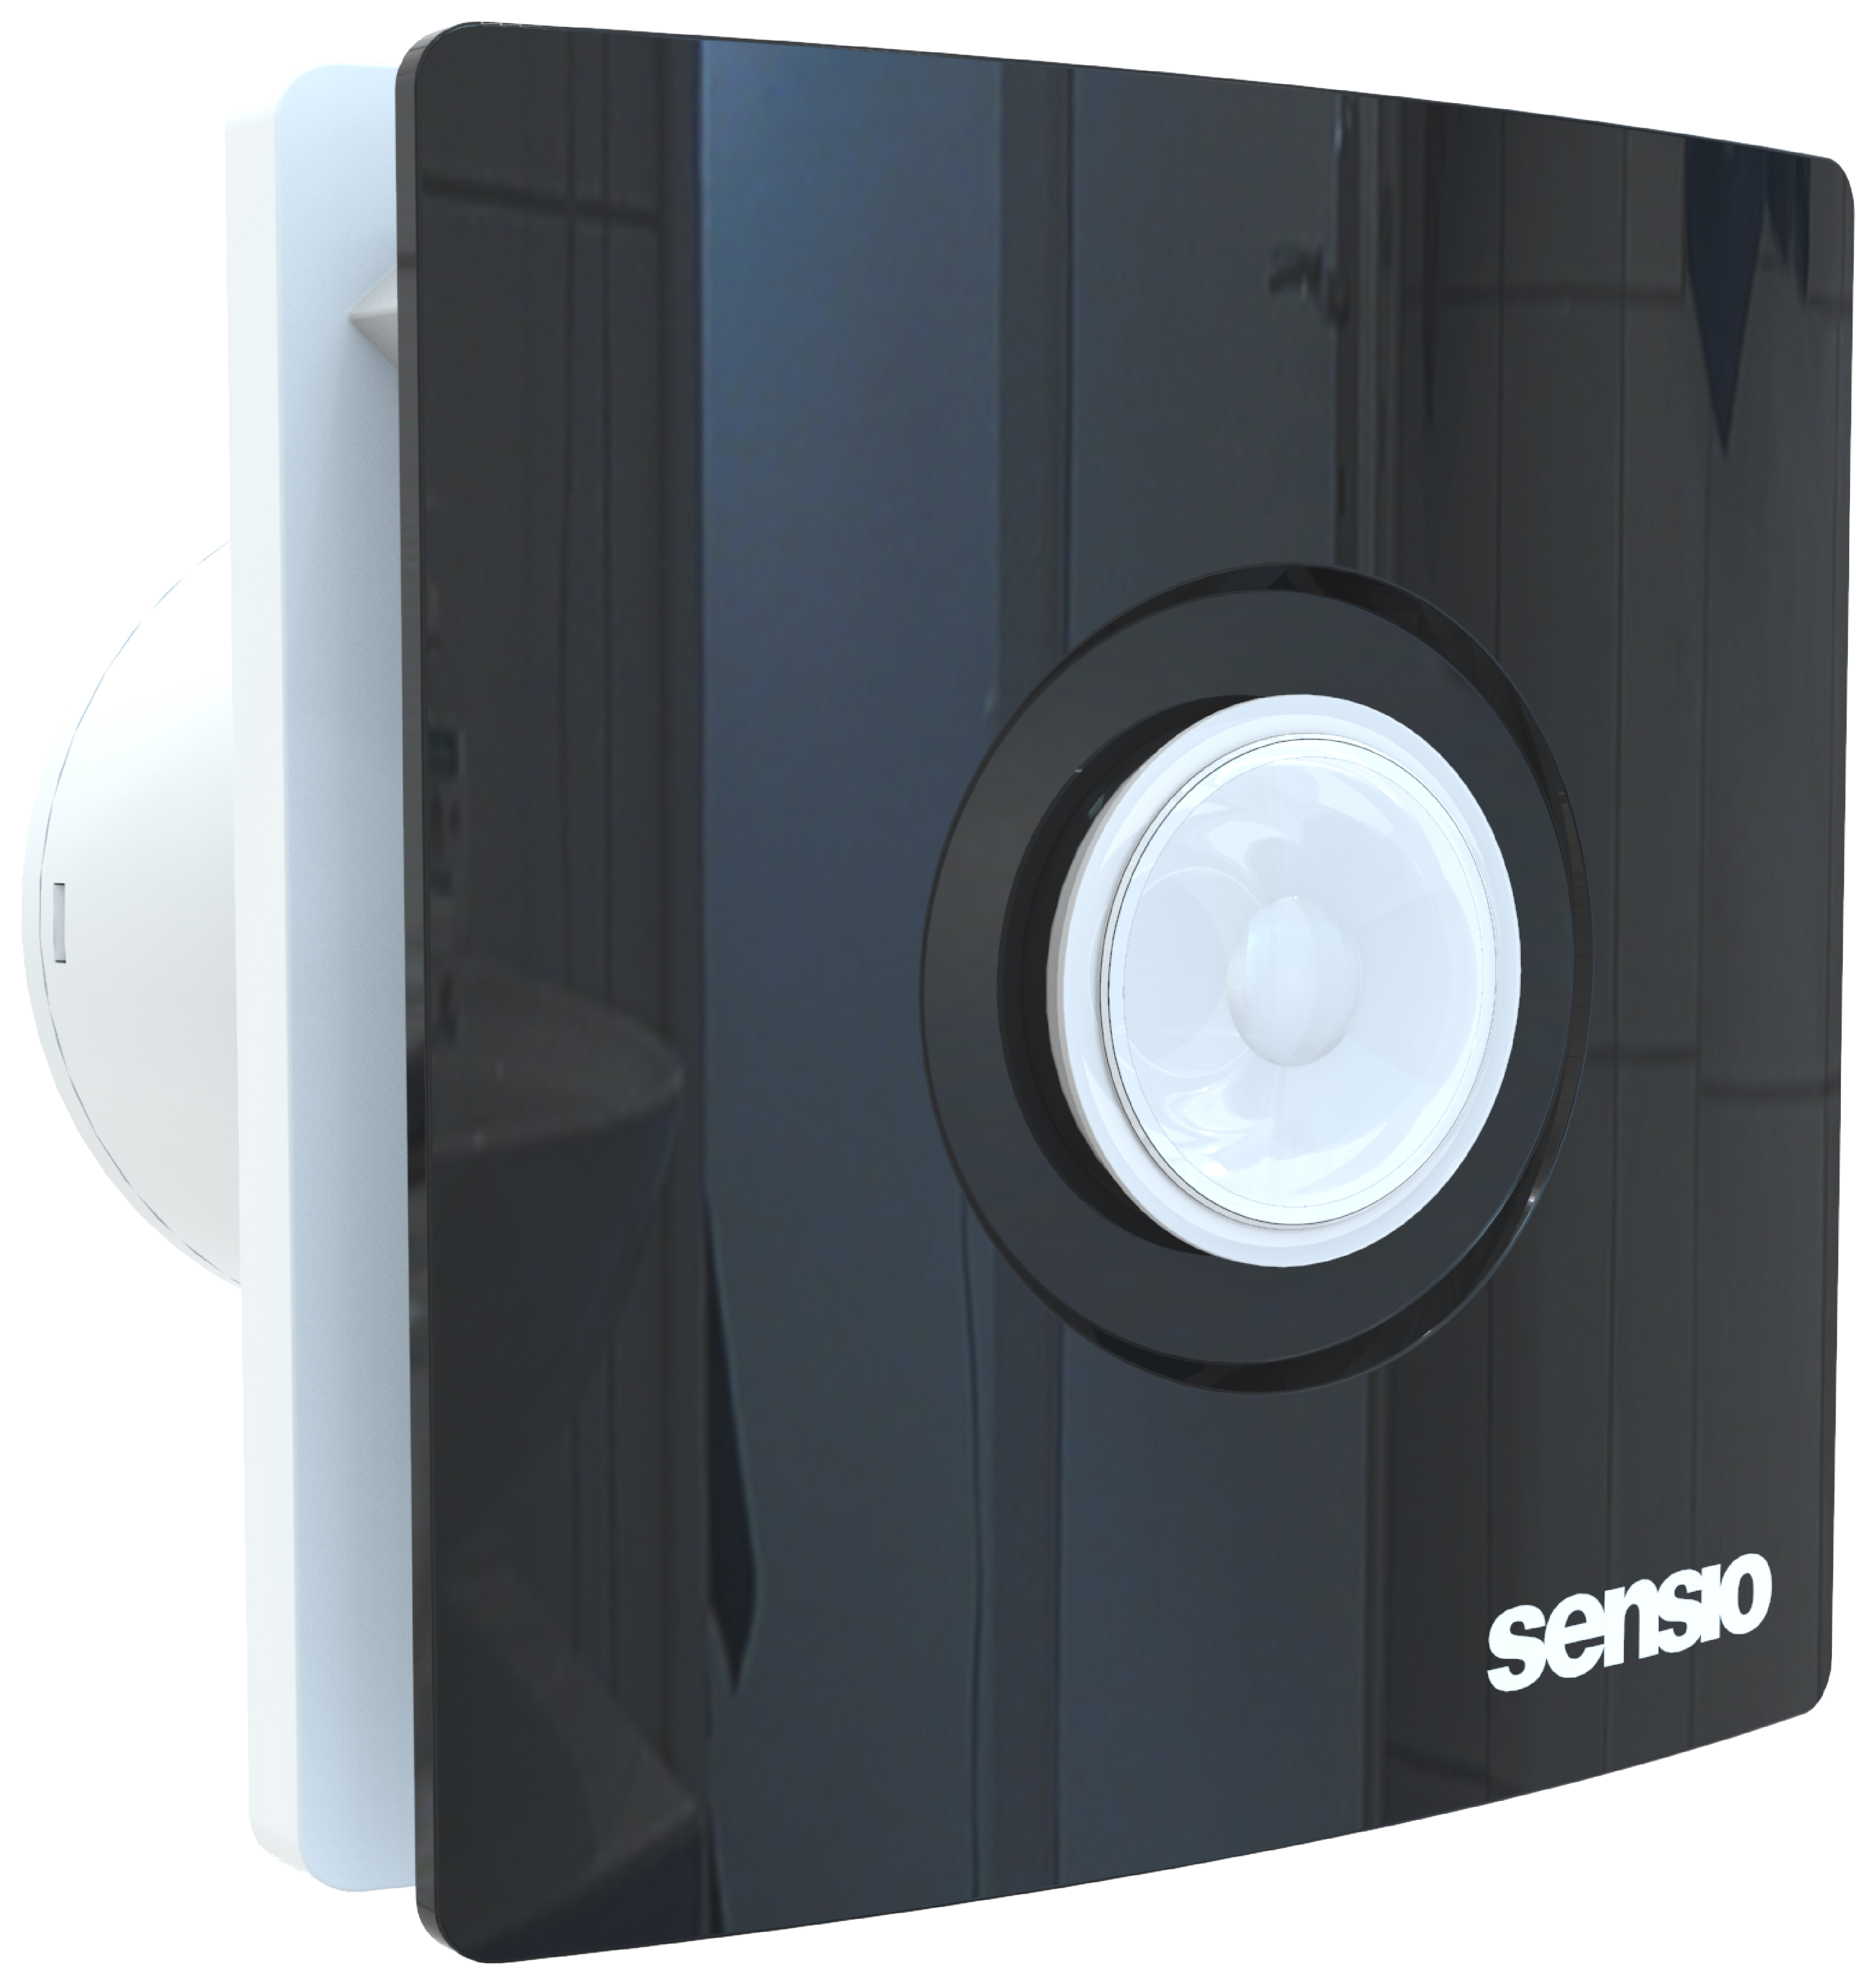 Image of Sensio Remy Black Wall Ventilation Fan with Aquilo Ventilation Ducting Kit - ø100mm